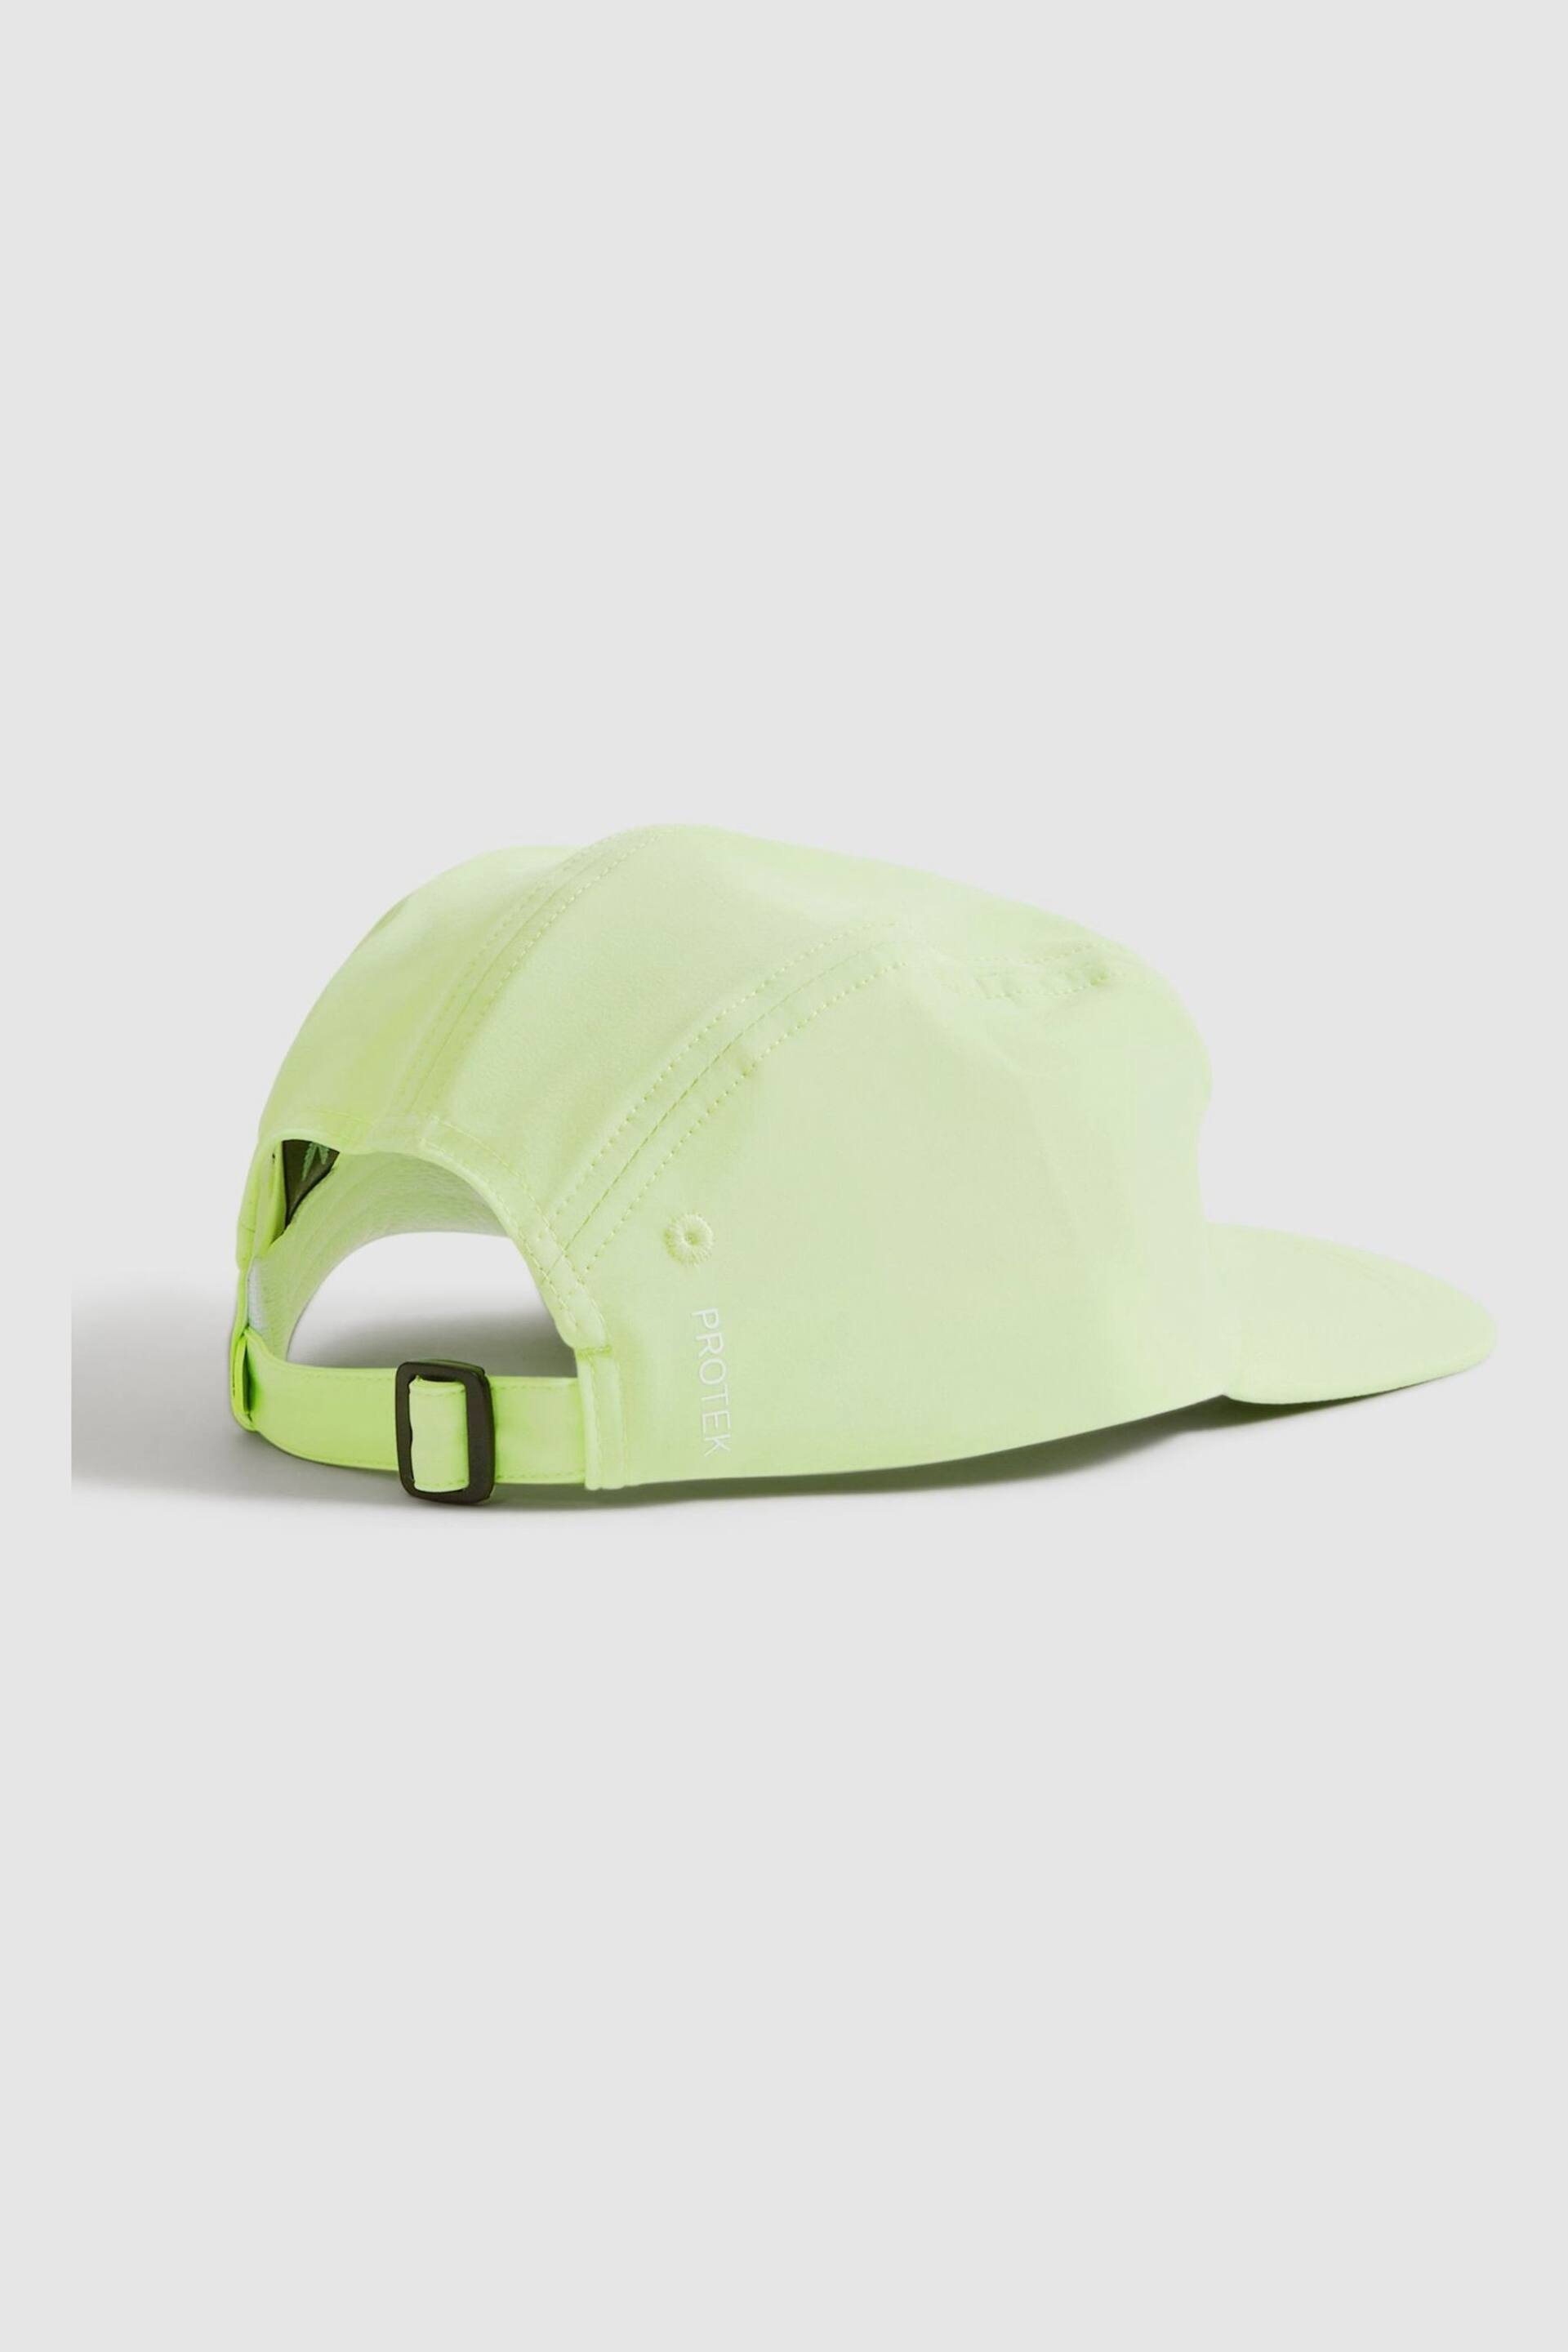 Reiss Iced Citrus Yellow Remy Castore Water Repellent Baseball Cap - Image 3 of 4